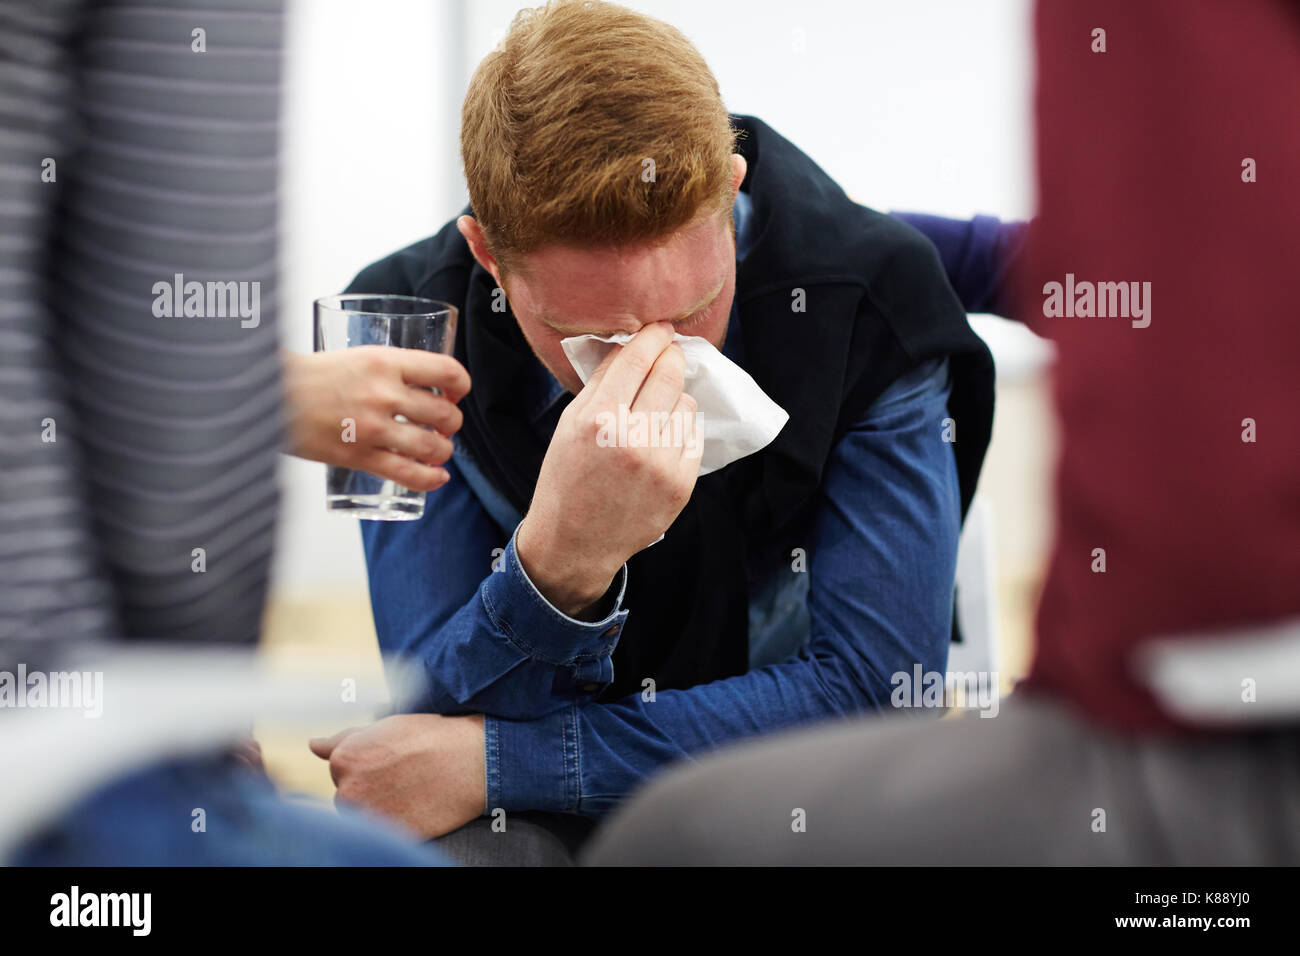 Frustrated man crying while one of his friends offering him glass of water Stock Photo